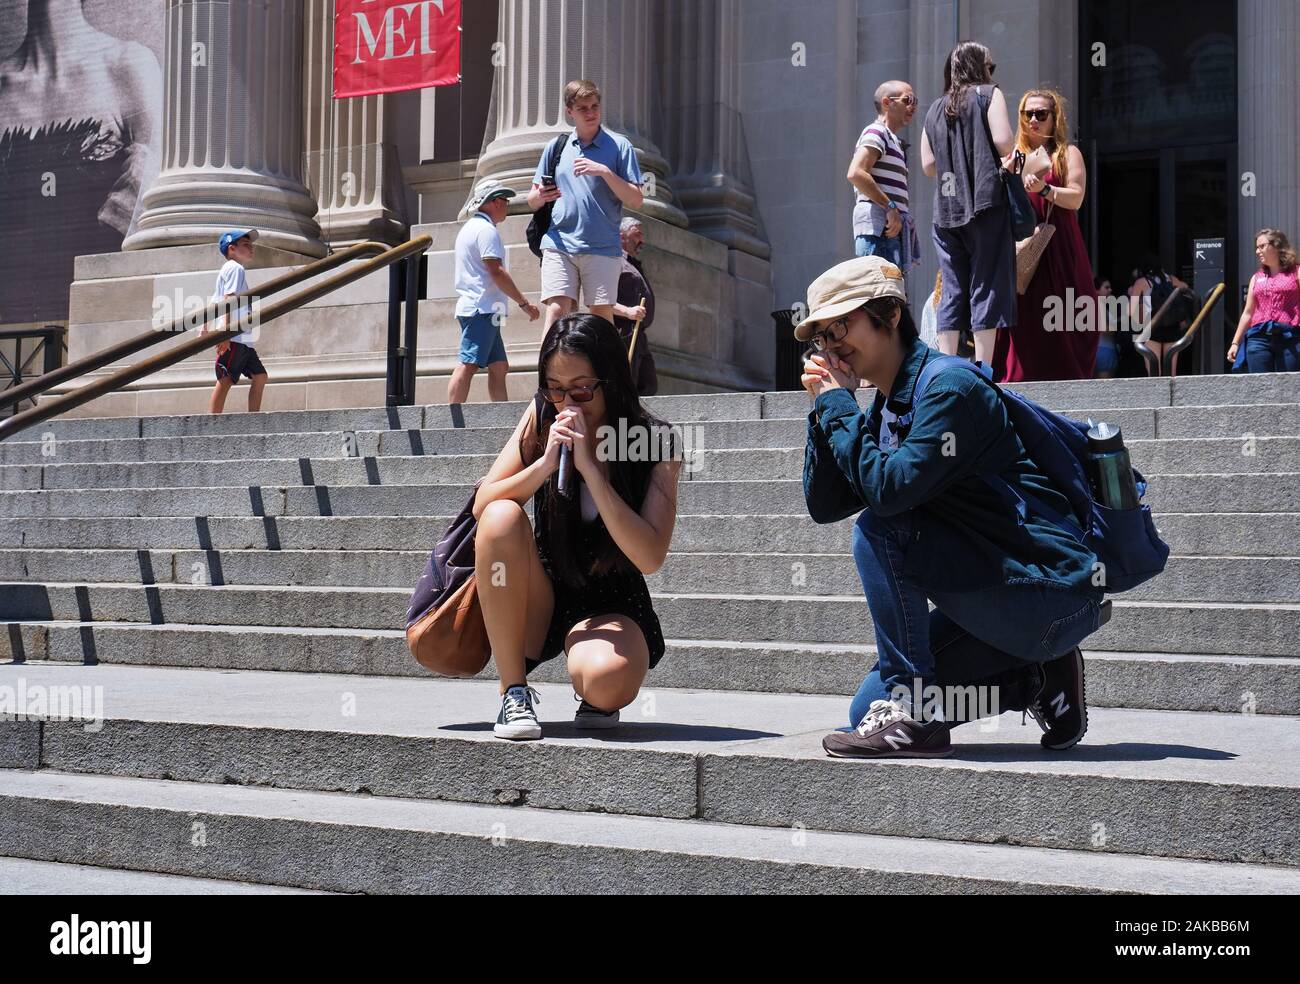 New York City, NY USA. Jul 2017. Asian teens funny posing for friends just outside the Metropolitan Museum of Art in New York City. Stock Photo